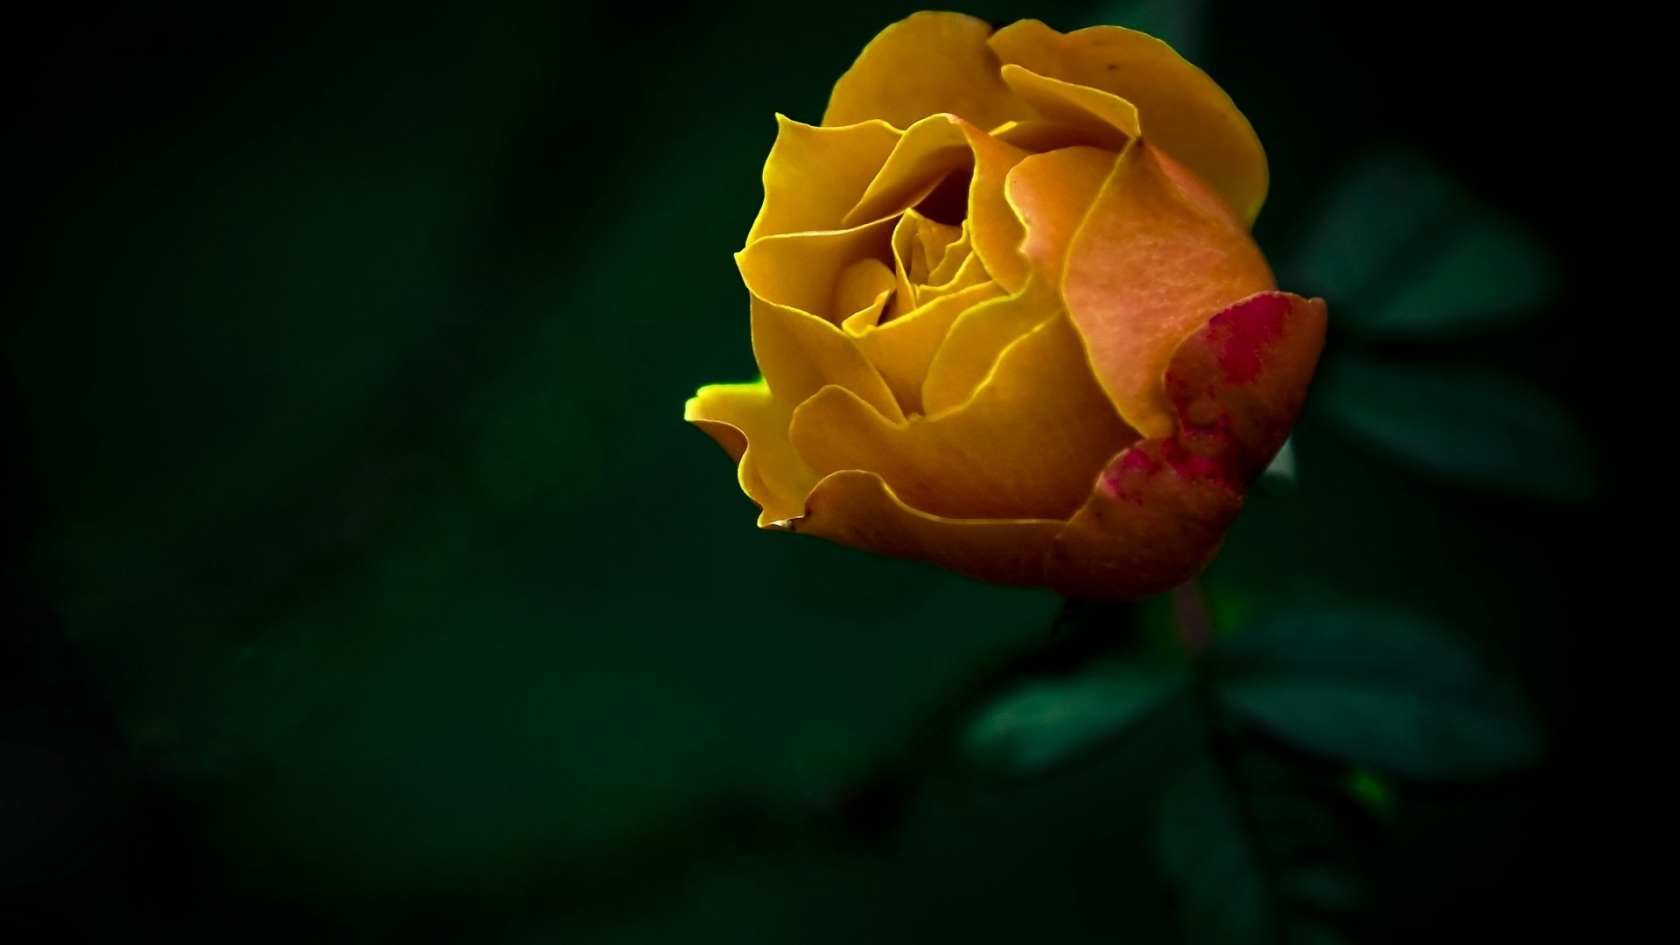 The last Rose for 1680 x 945 HDTV resolution